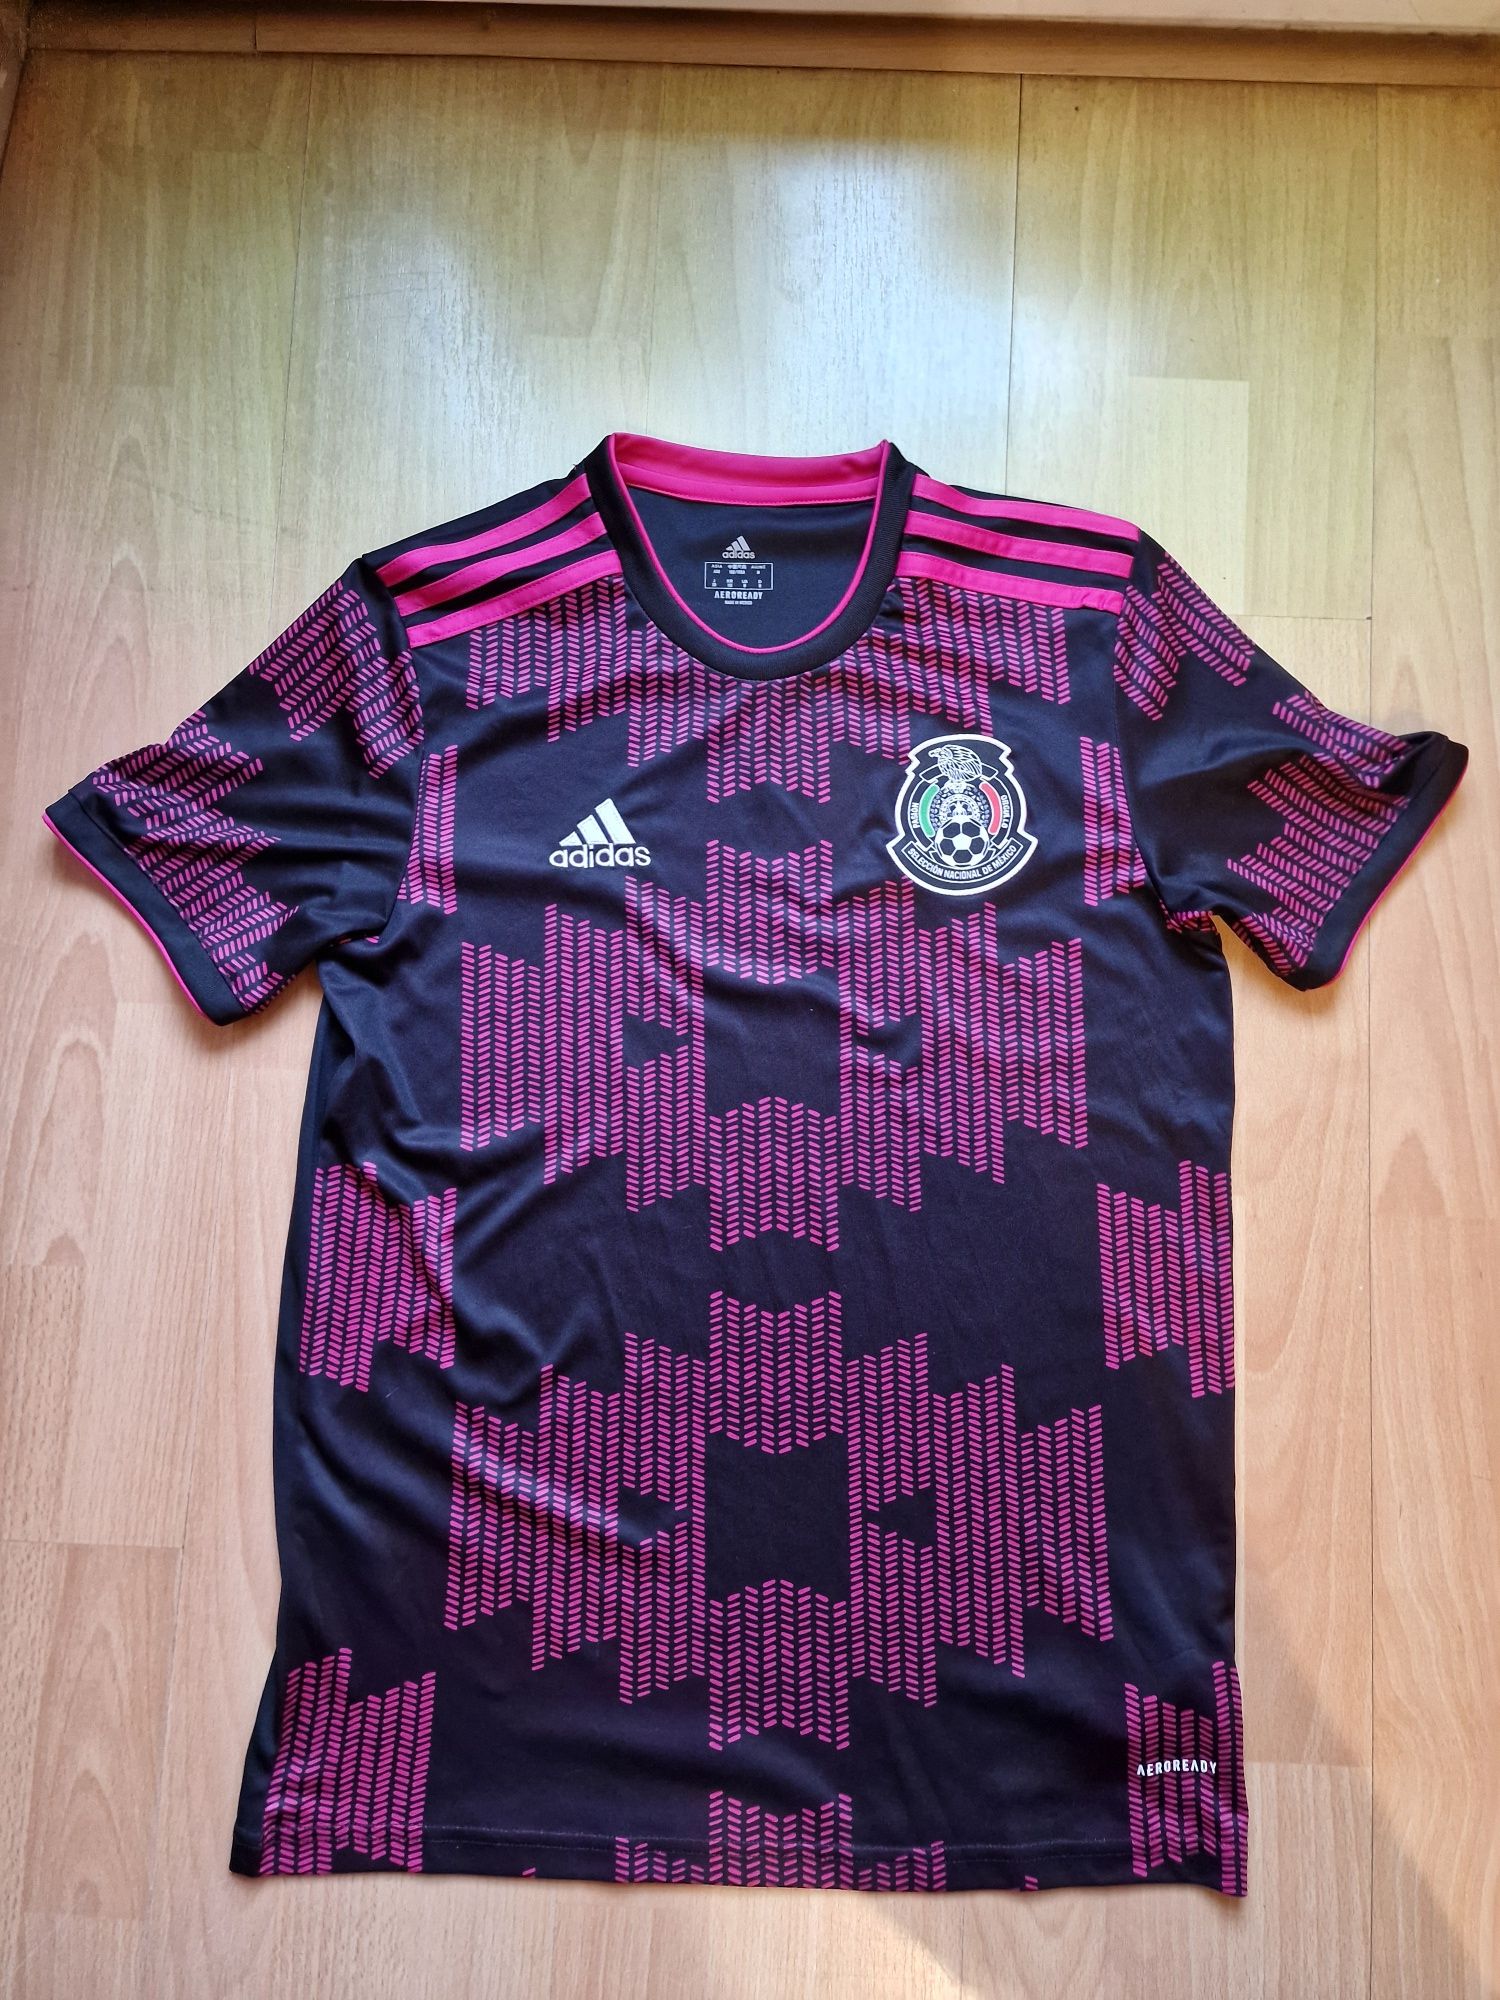 Mexico football jersey excellent condition